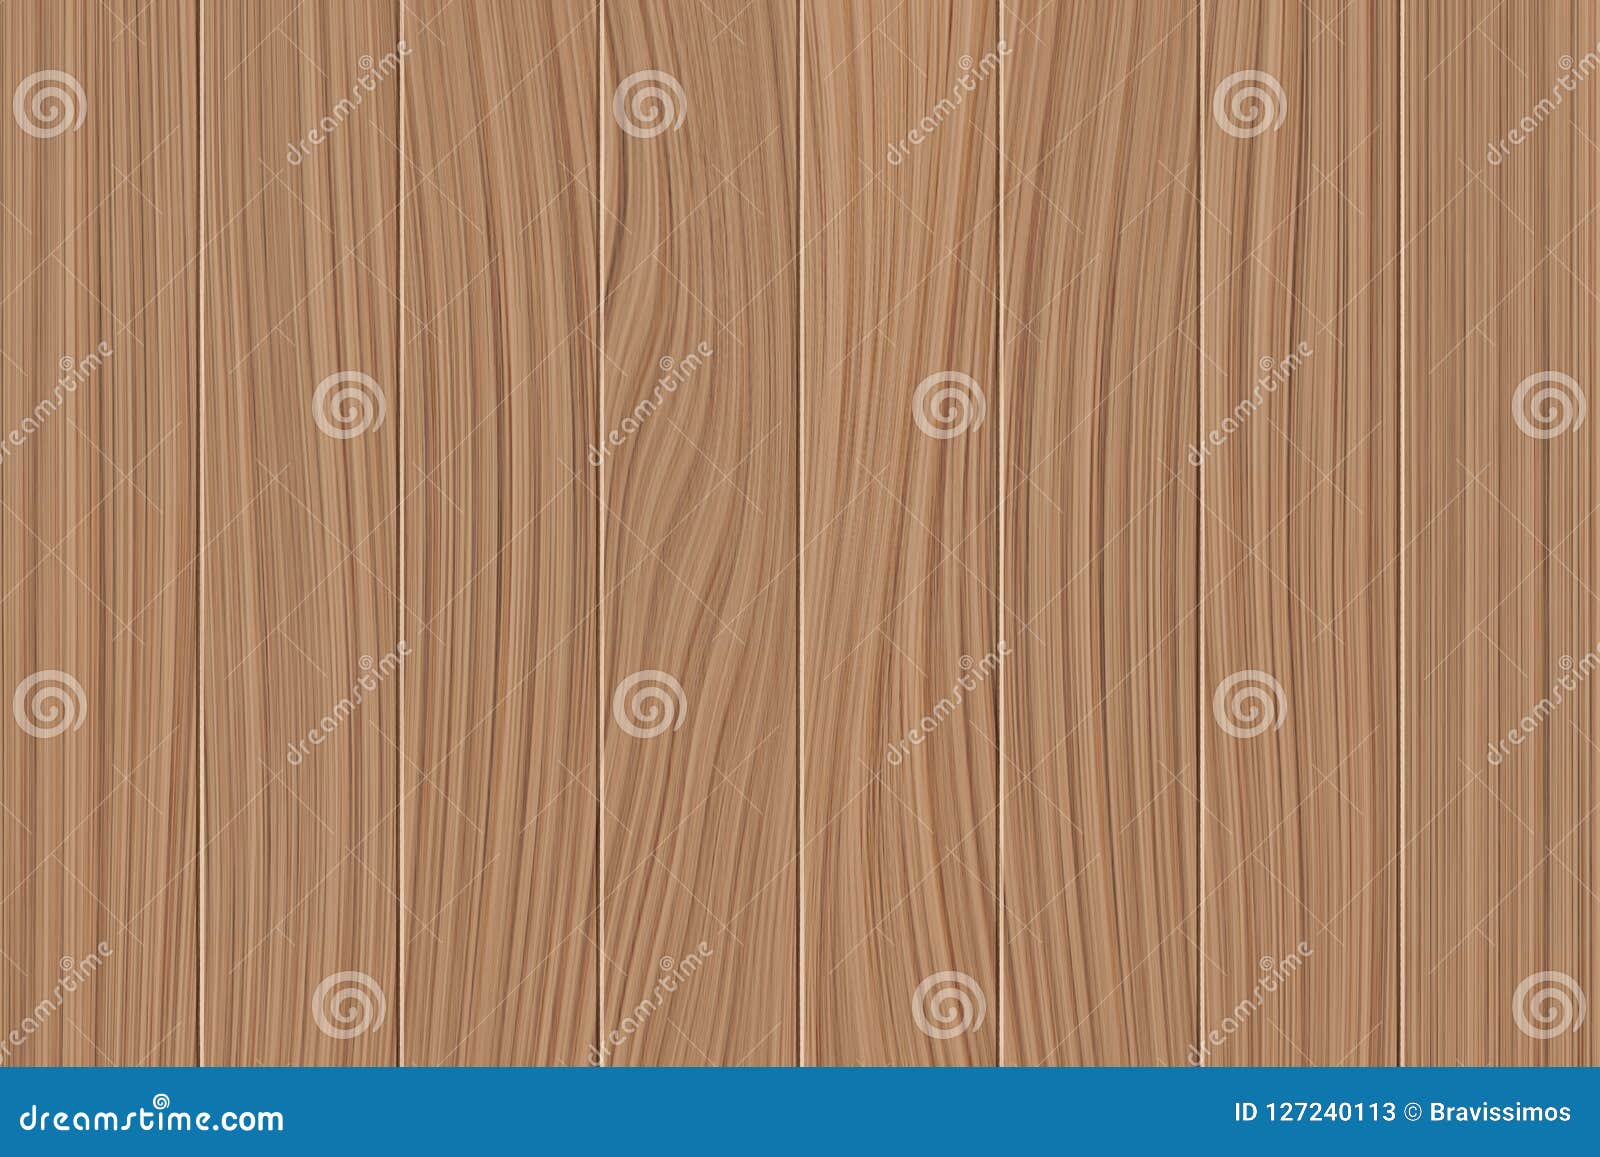 Wood Board Isolated On White Background Vertical Plank Planks Wood